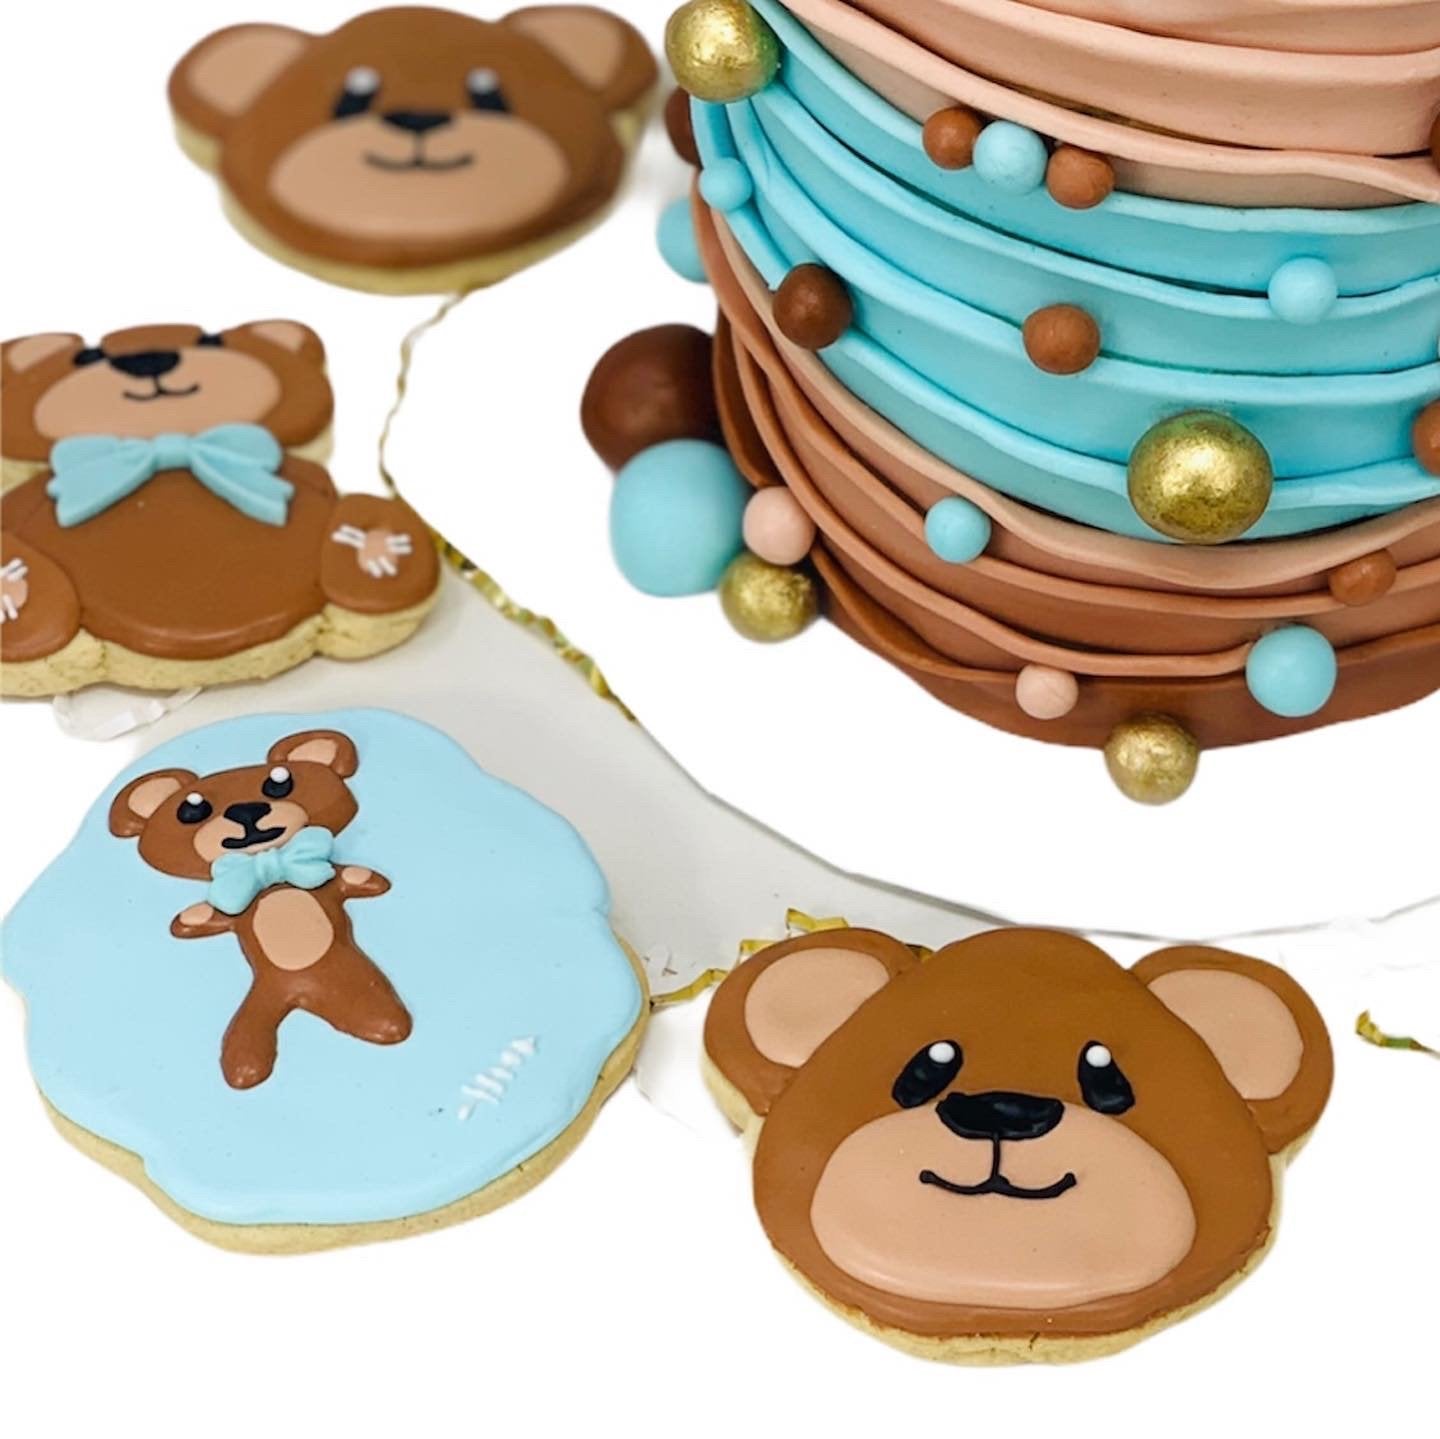 Teddy bear cookie cutter for baby shower